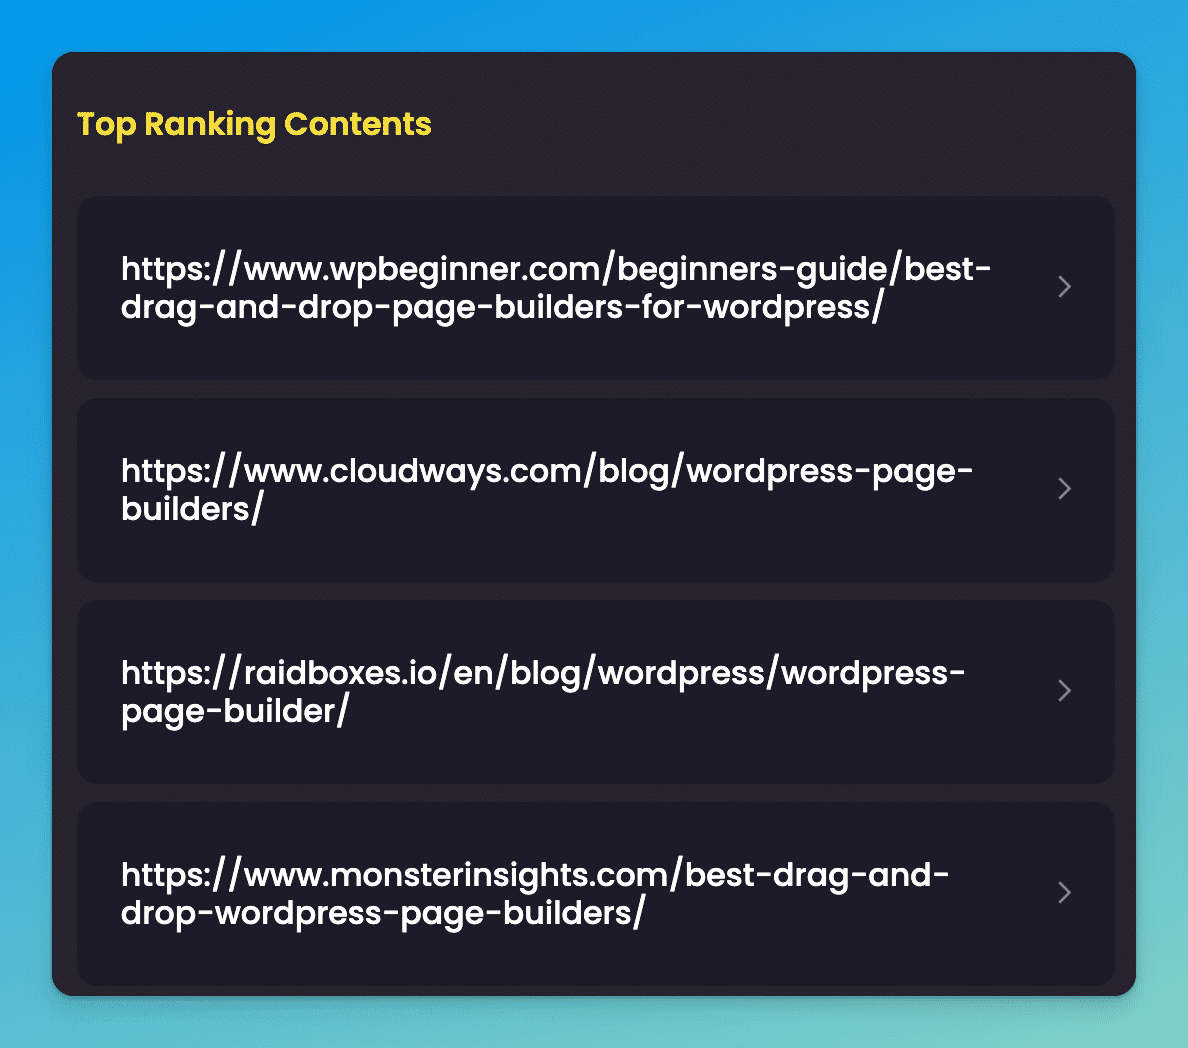 Top ranking contents for a blog rewritten with content at scale.